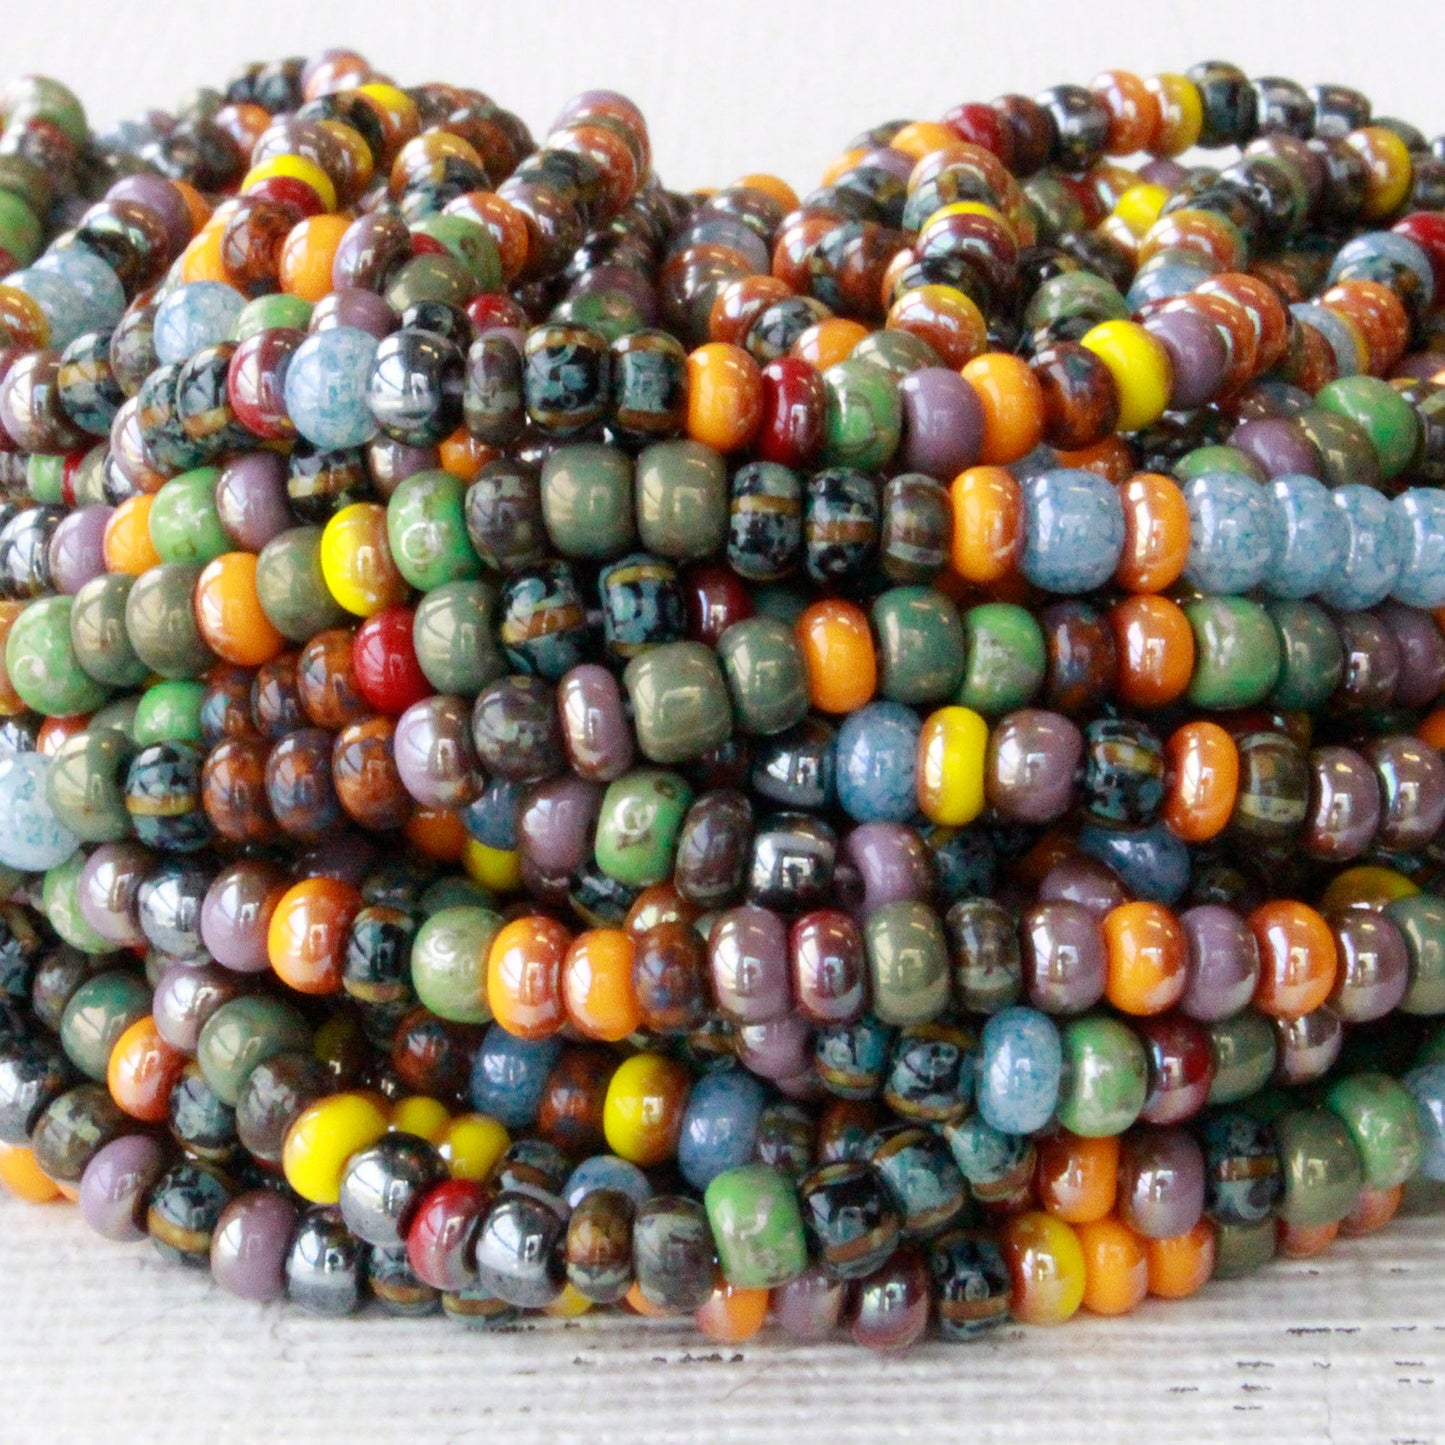 Size 5 Seed Beads - Luster Shiny Opaque Seed Bead Mix - Choose Amount